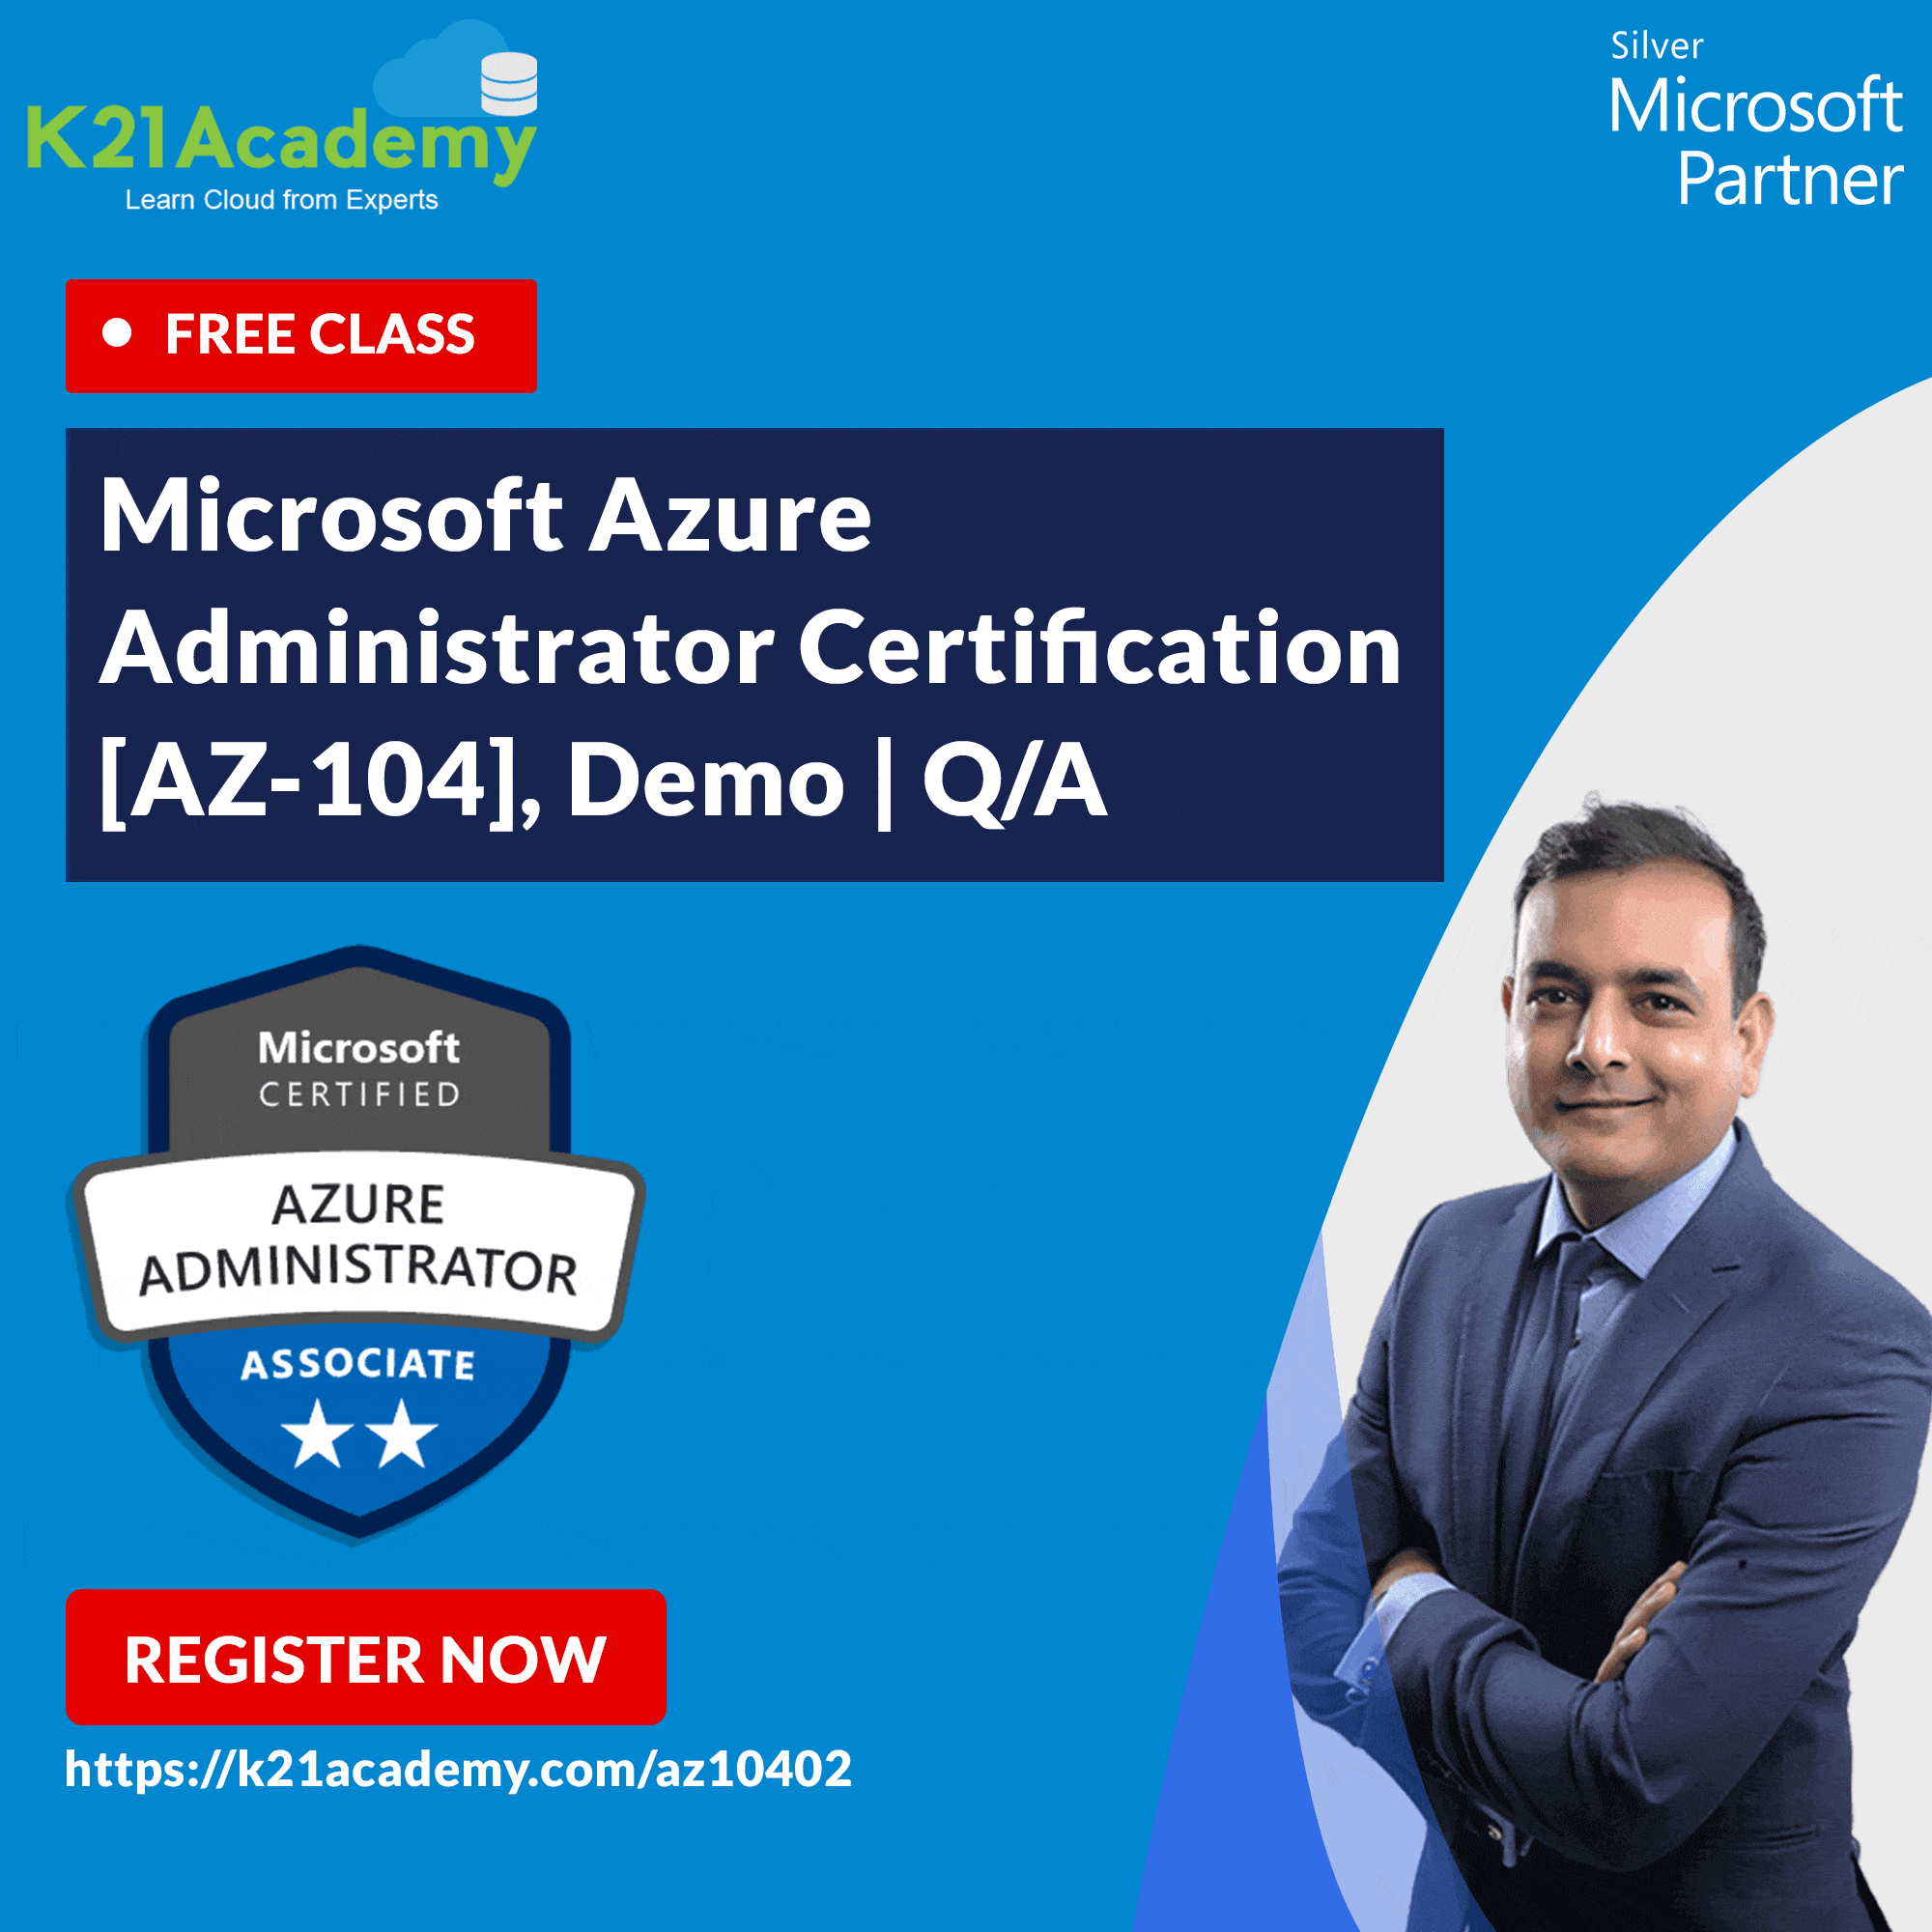 Microsoft Azure Administrator Roles And Responsibilities